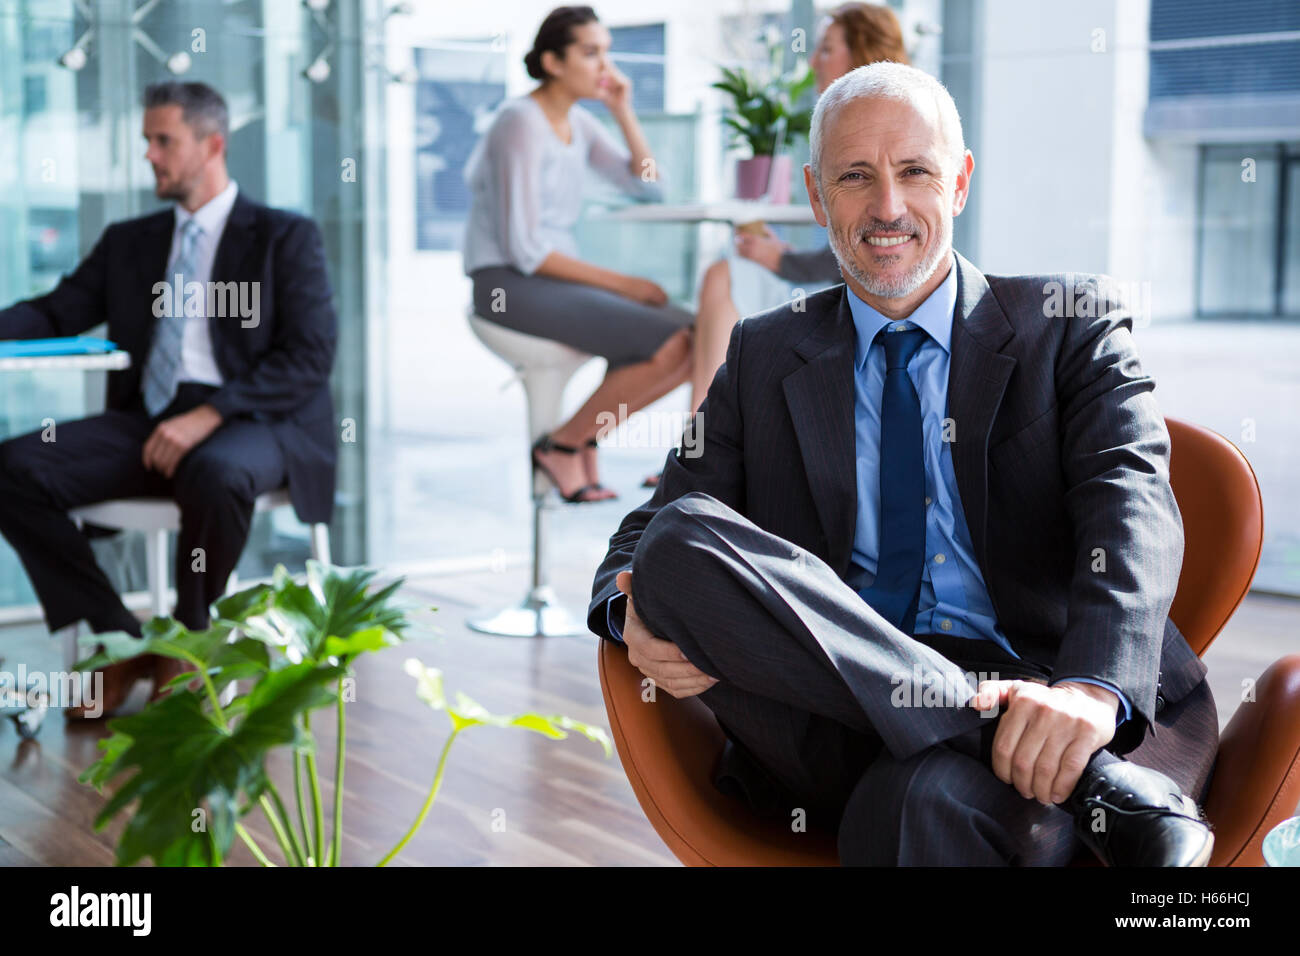 Smiling businessman sitting on chair in office Stock Photo